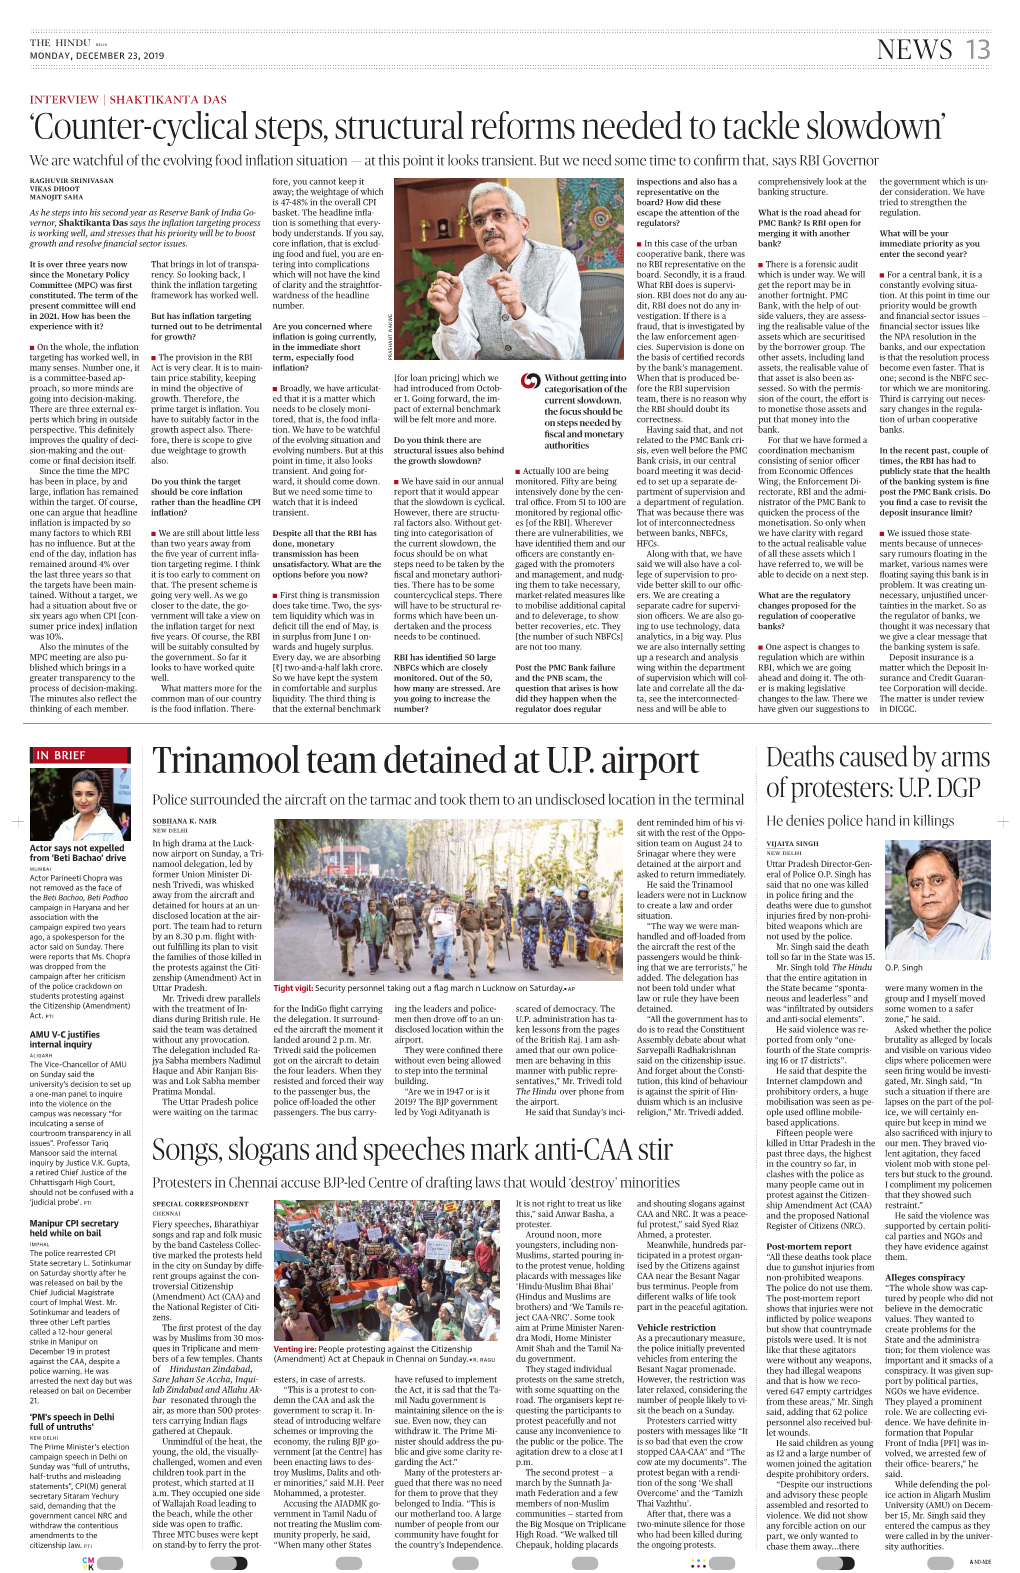 Trinamool Team Detained at up Airport